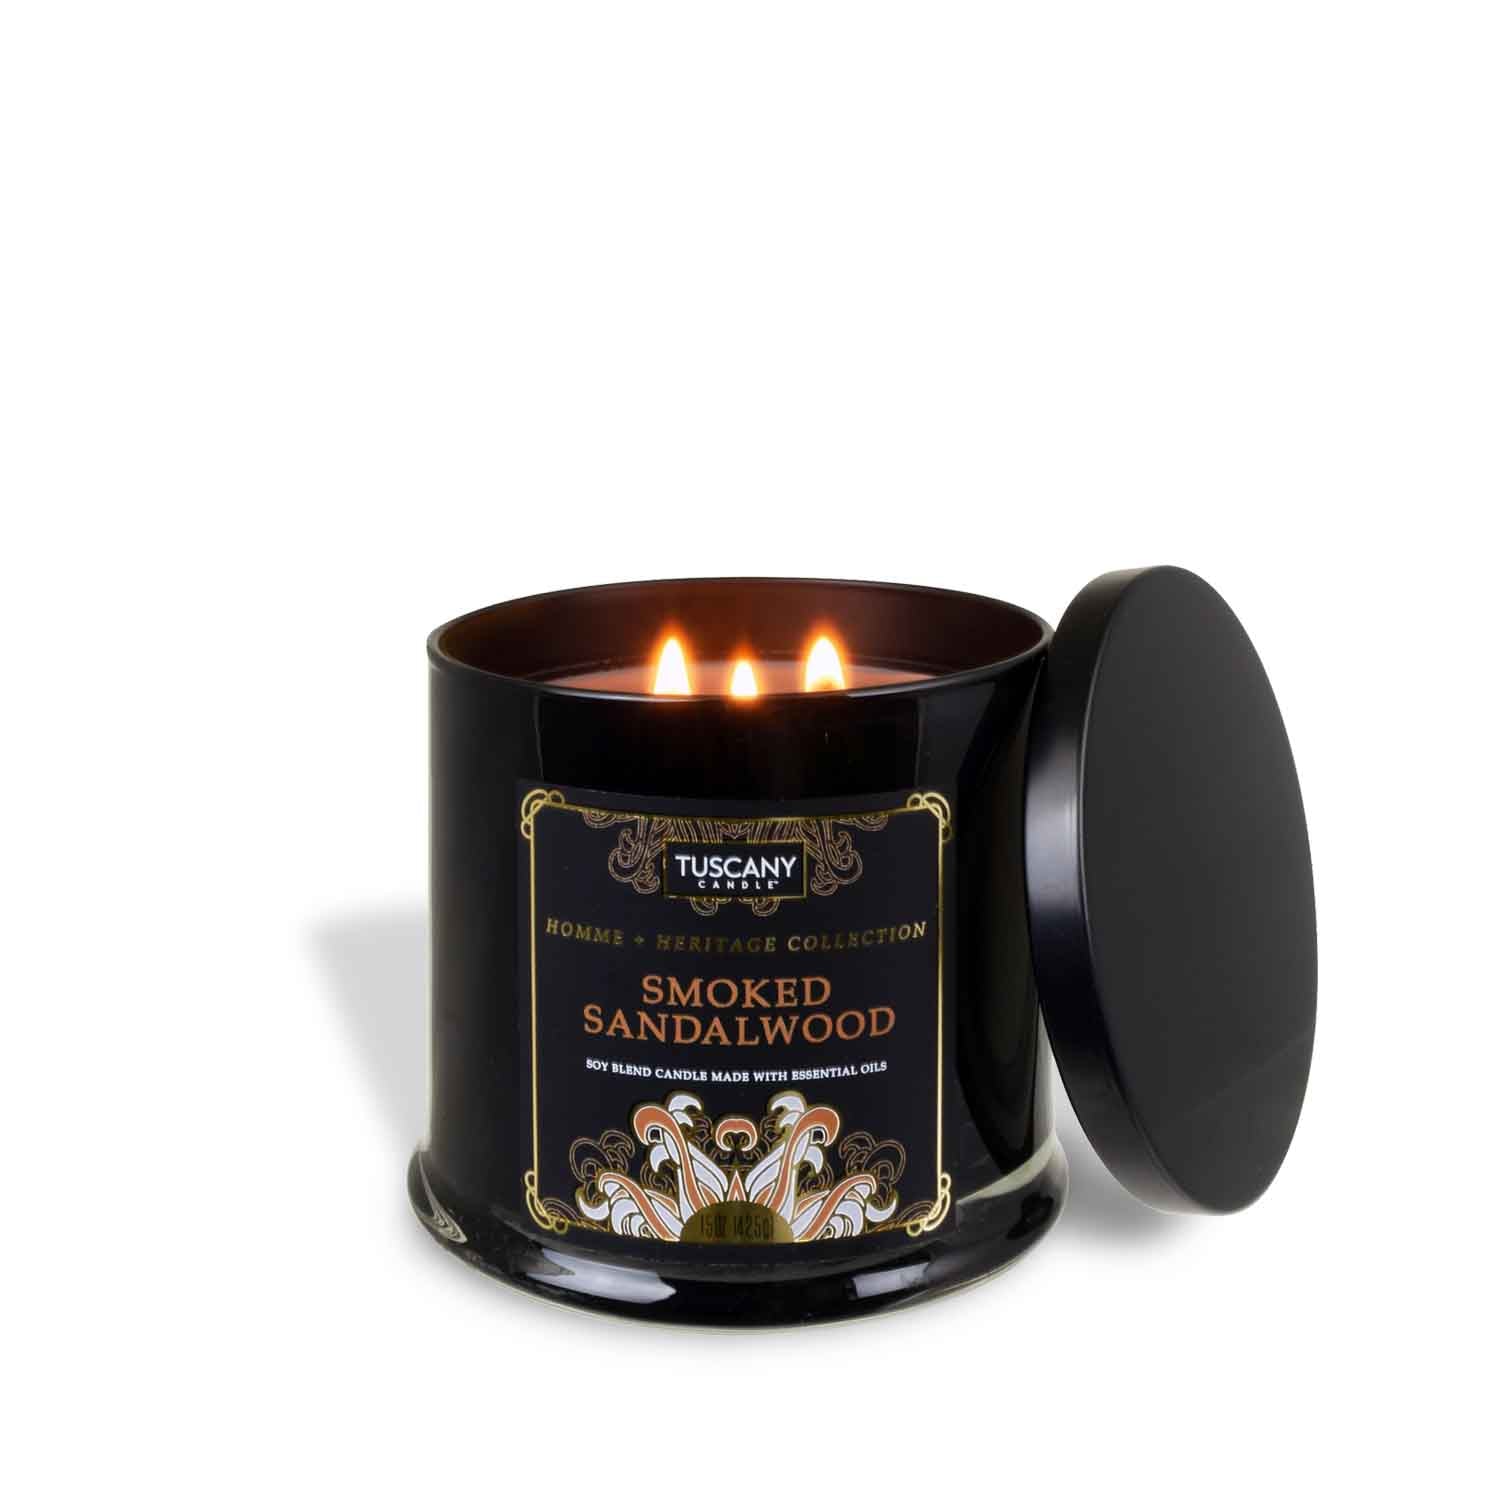 A Smoked Sandalwood scented candle in a black tin on a white background, featuring the captivating aroma of Homme + Heritage Collection from Tuscany Candle.